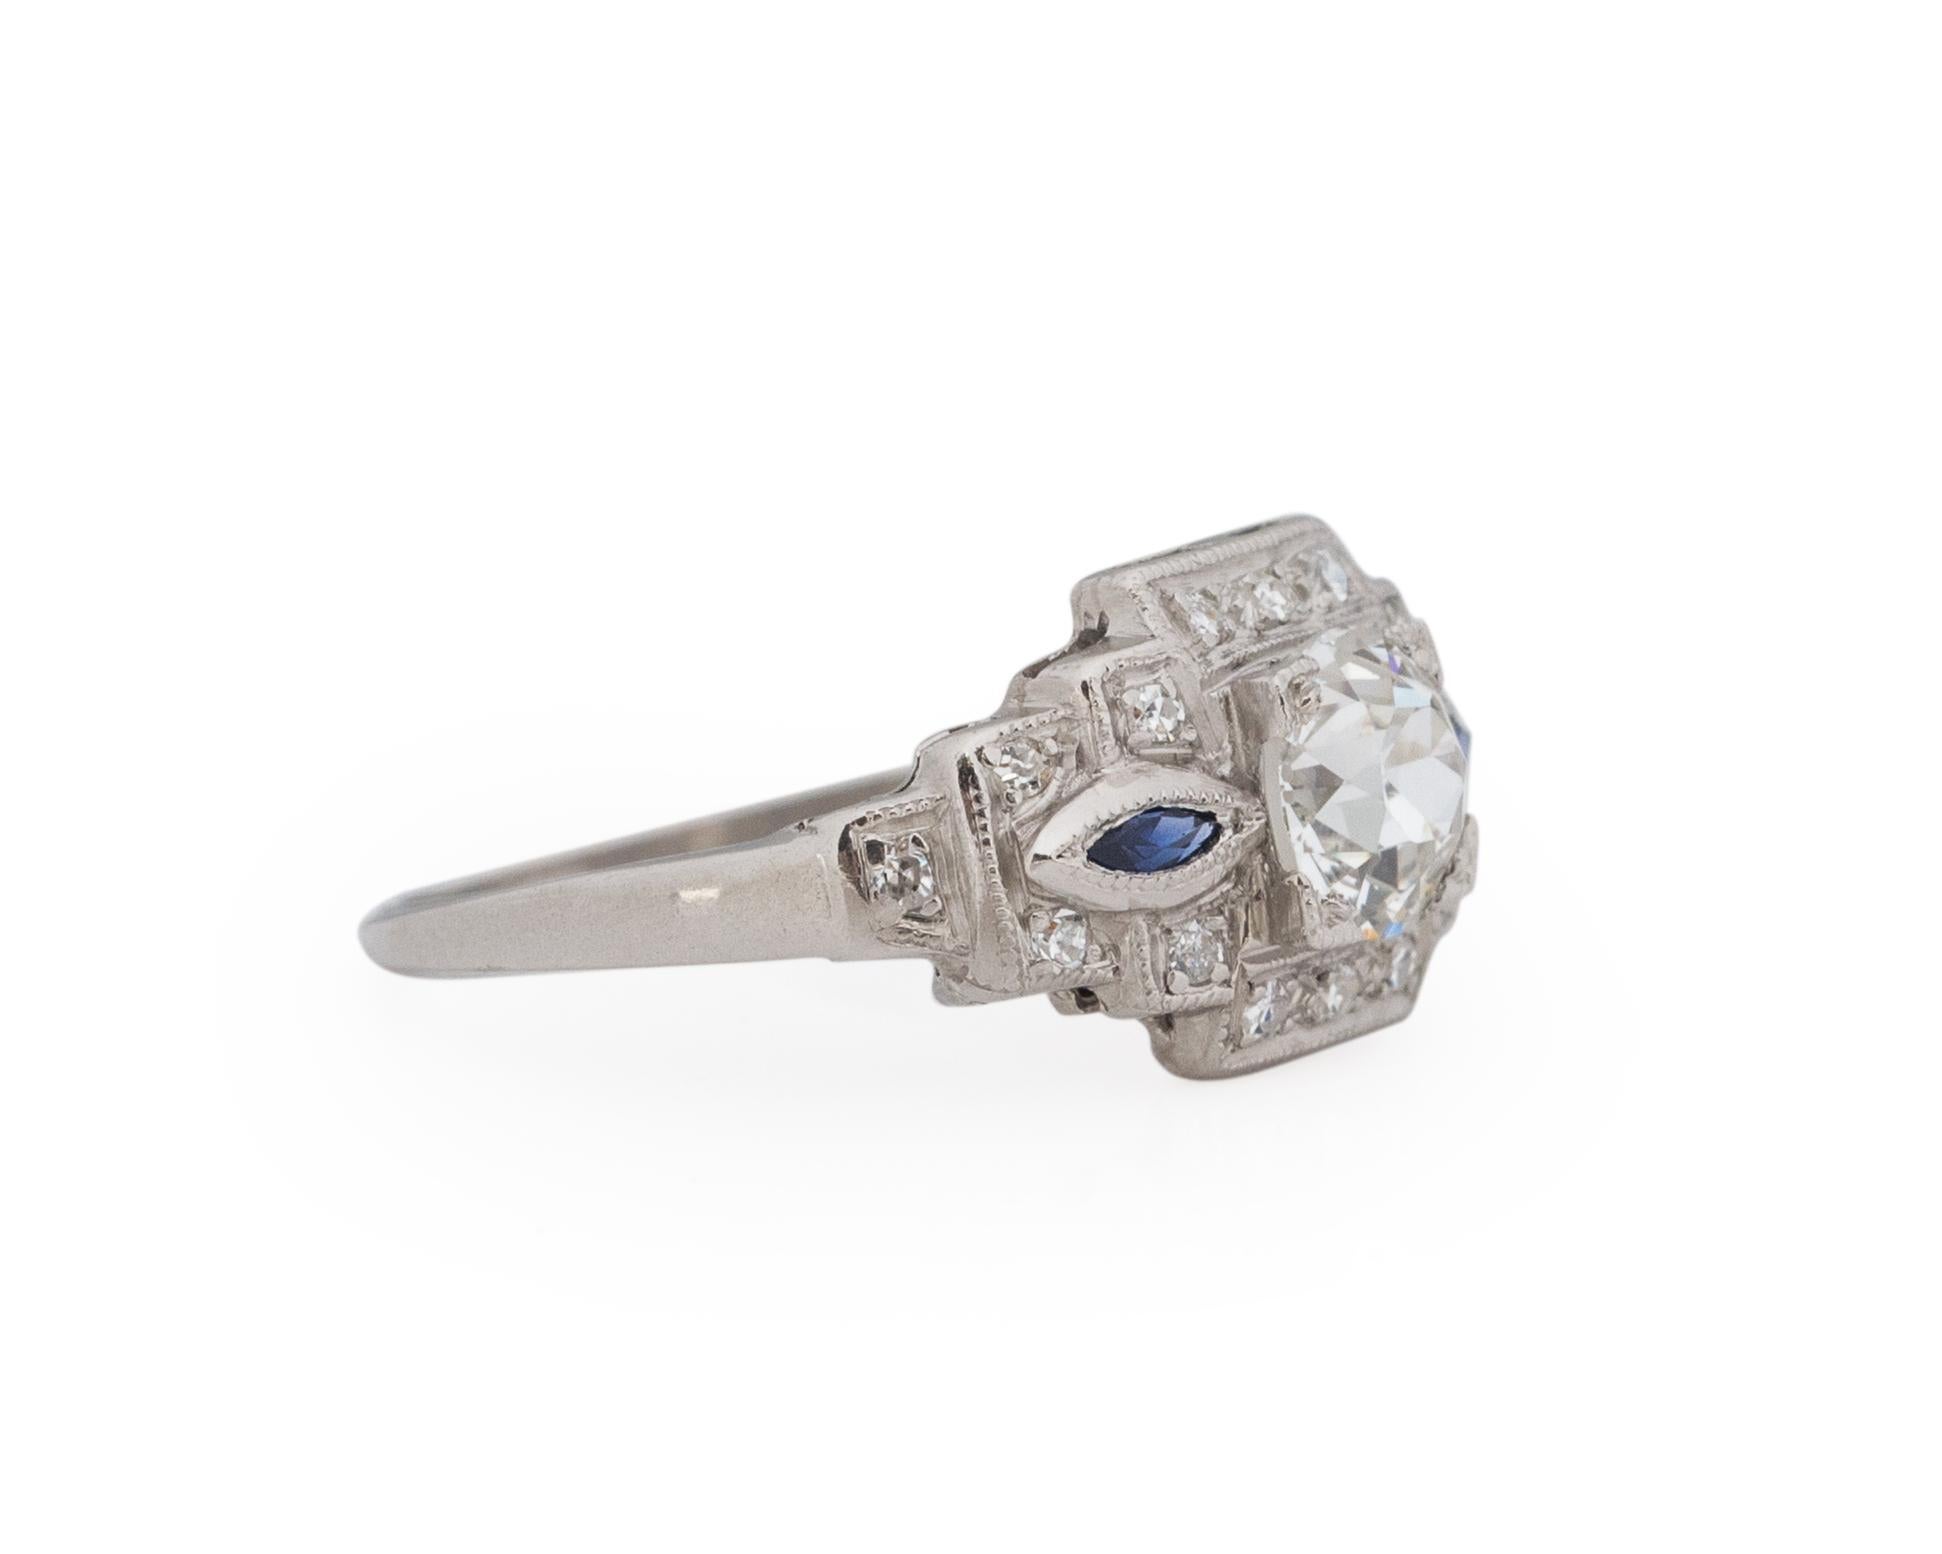 Ring Size: 6.75
Metal Type: Platinum [Hallmarked, and Tested]
Weight: 3.5 grams

Center Diamond Details:
GIA REPORT #: 5212696278
Weight: .85carat
Cut: Old European brilliant
Color: I
Clarity: VS2
Measurements: 5.82mm x 5.79mm x 3.70mm

Side Stone